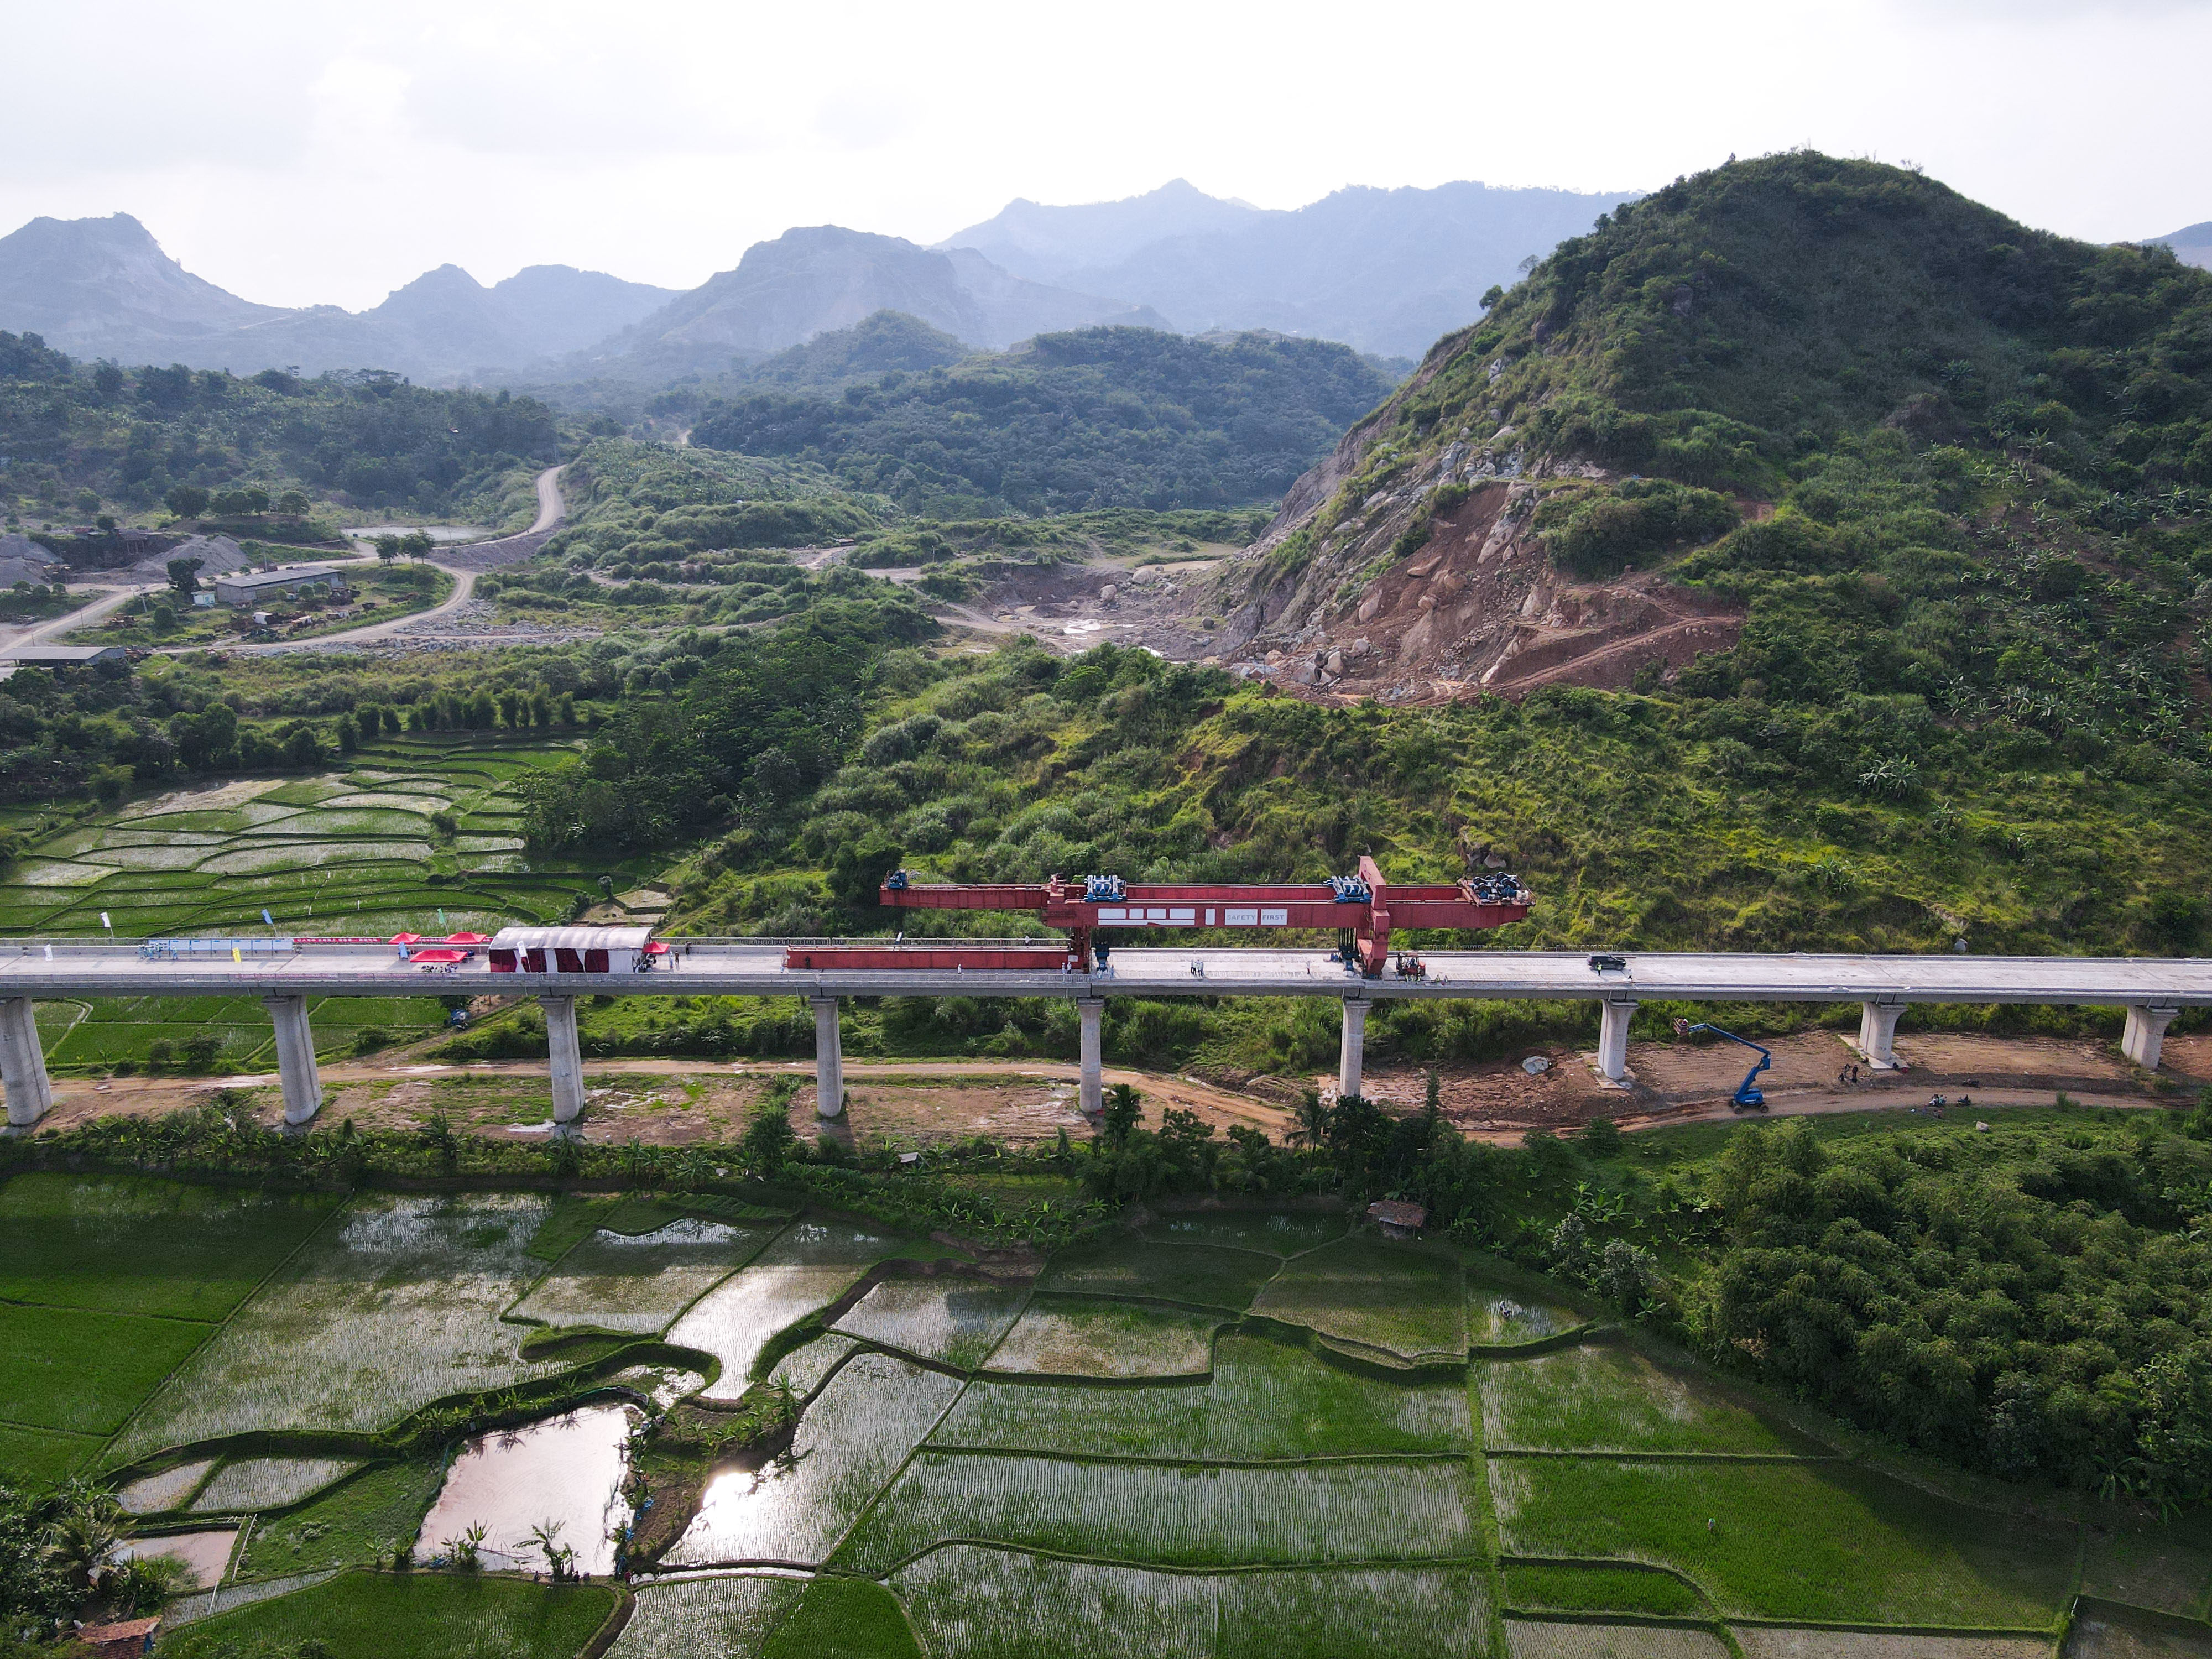 One of the construction sites on the Jakarta-Bandung High-Speed Railway in Purwakarta, Indonesia. The line is slated to open in June 2023. Photo: Xinhua